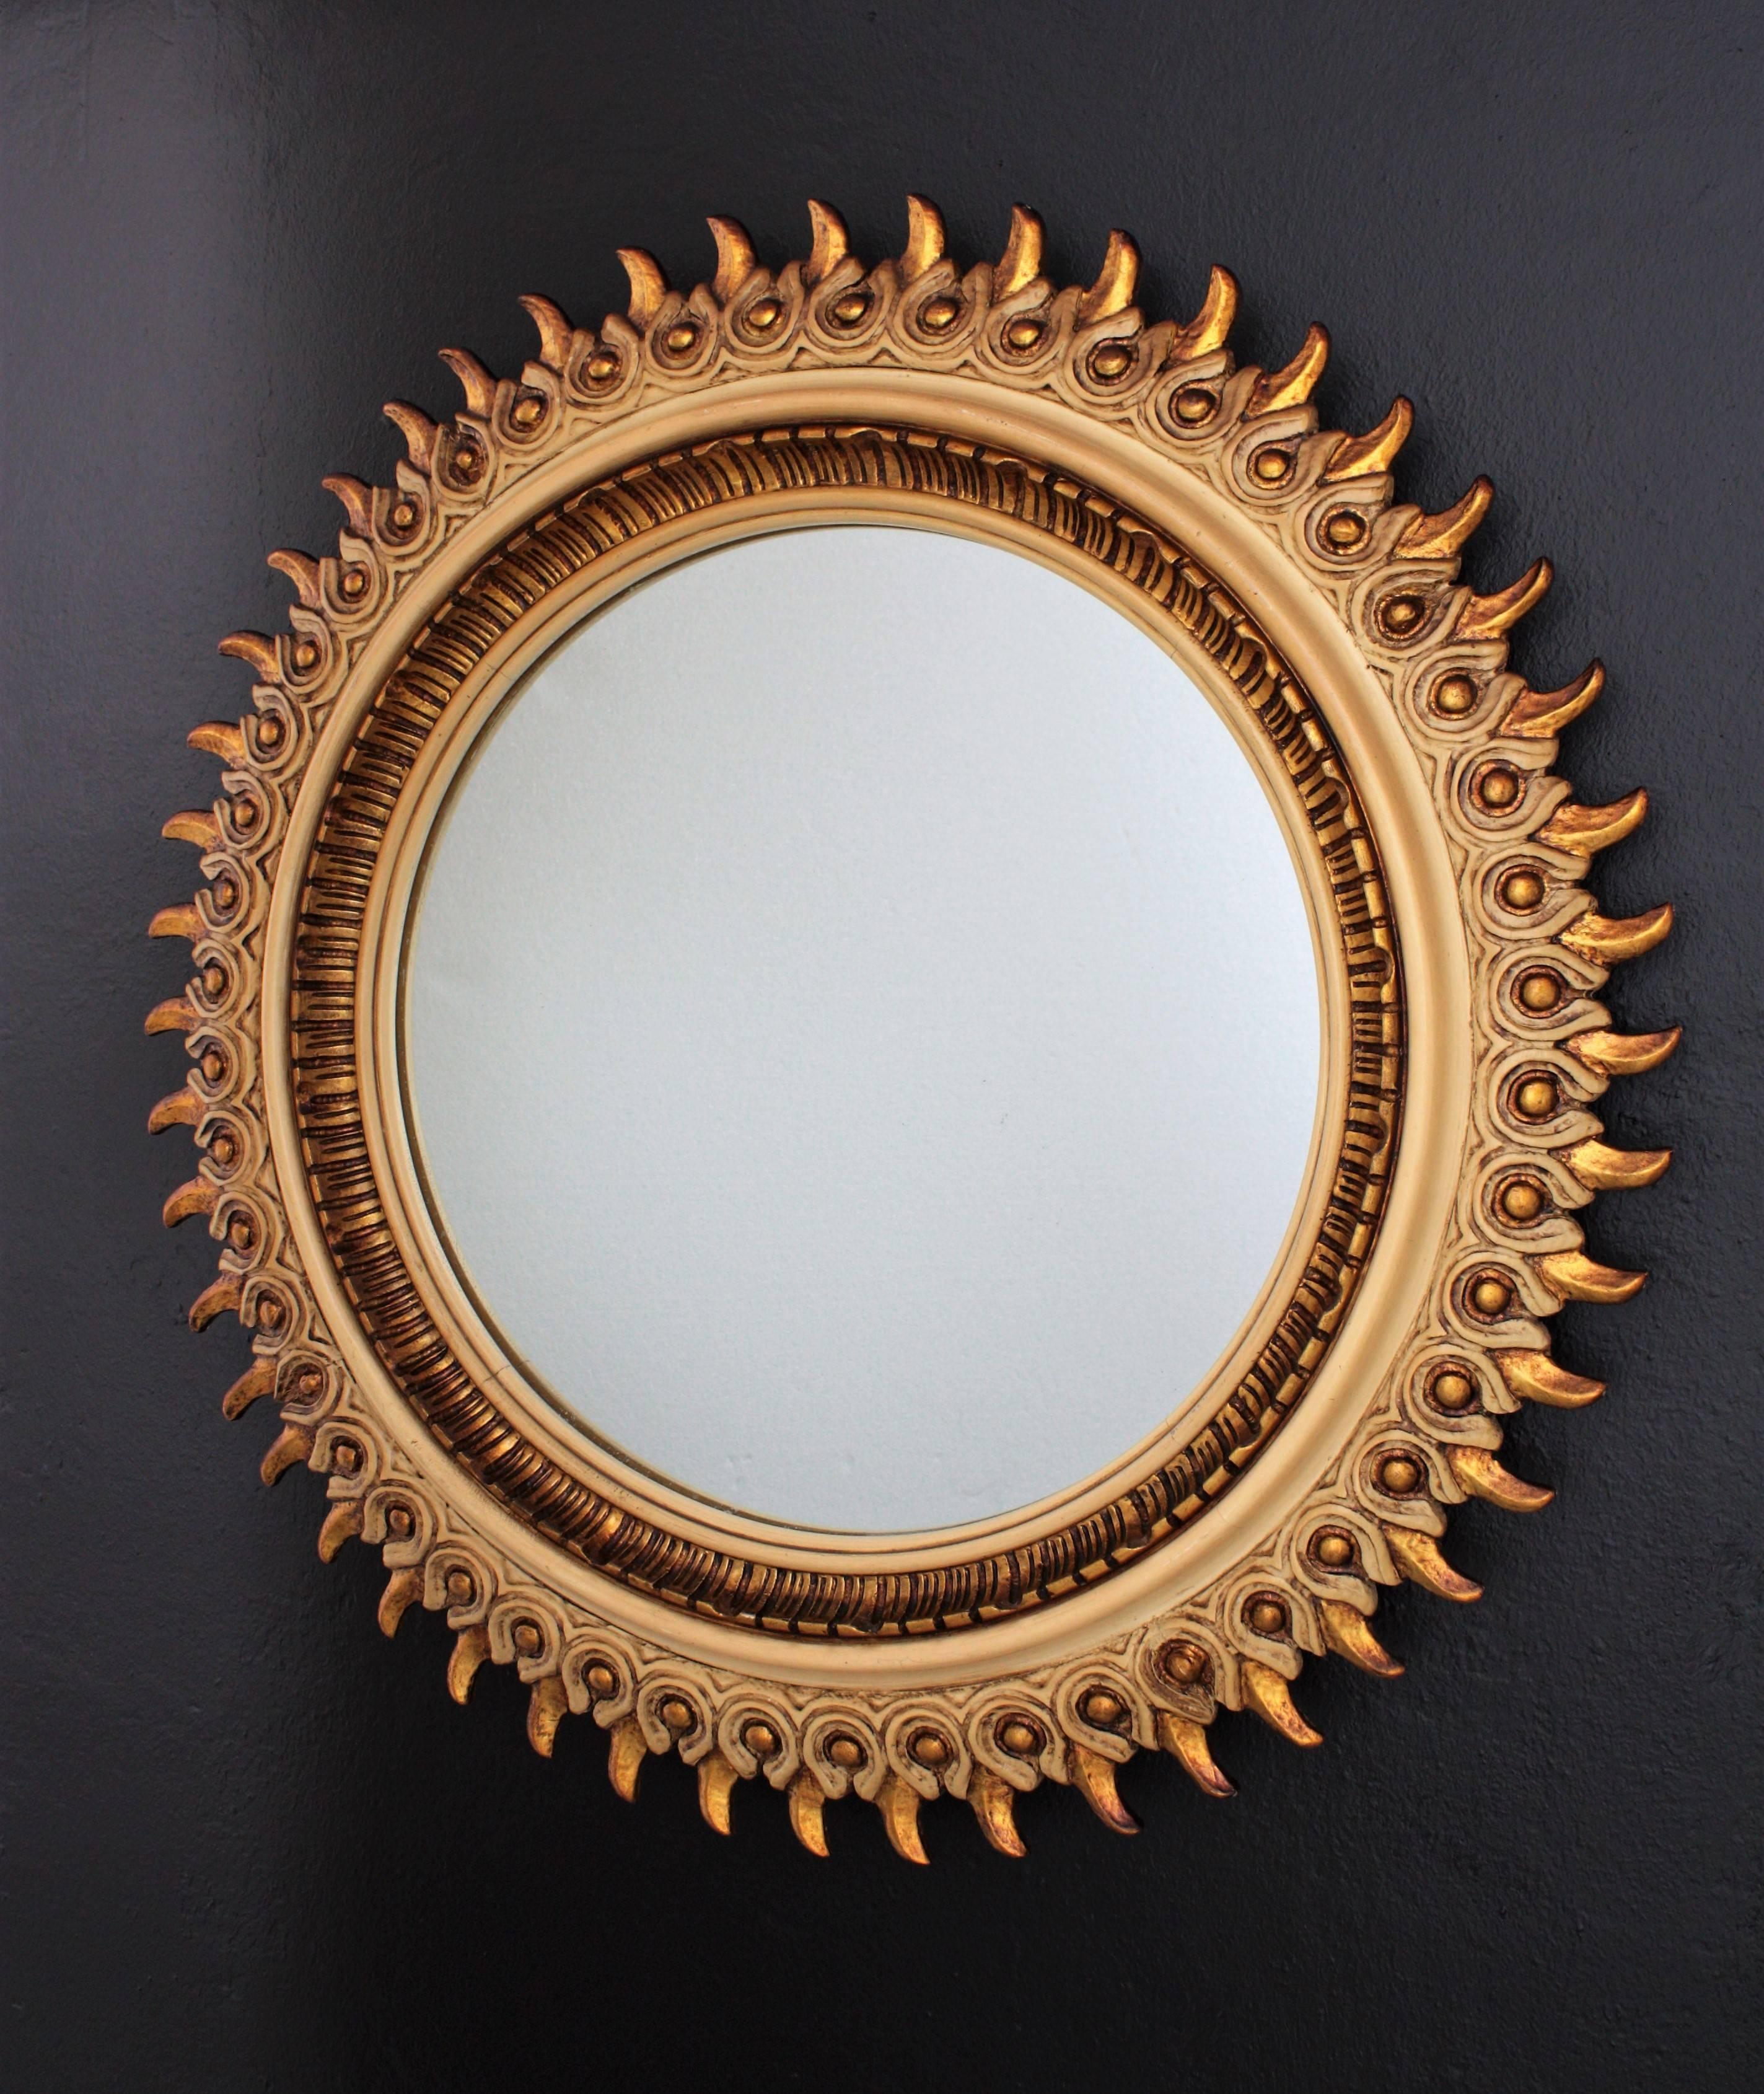 Midcentury sunburst mirror, giltwood and beige lacquer, Spain, 1950s
An amazing Francisco Hurtado carved wood sunburst mirror combining lacquered parts in ivory color and gold leaf gilt accents.
Francisco Hurtado was a Spanish cabinet maker and